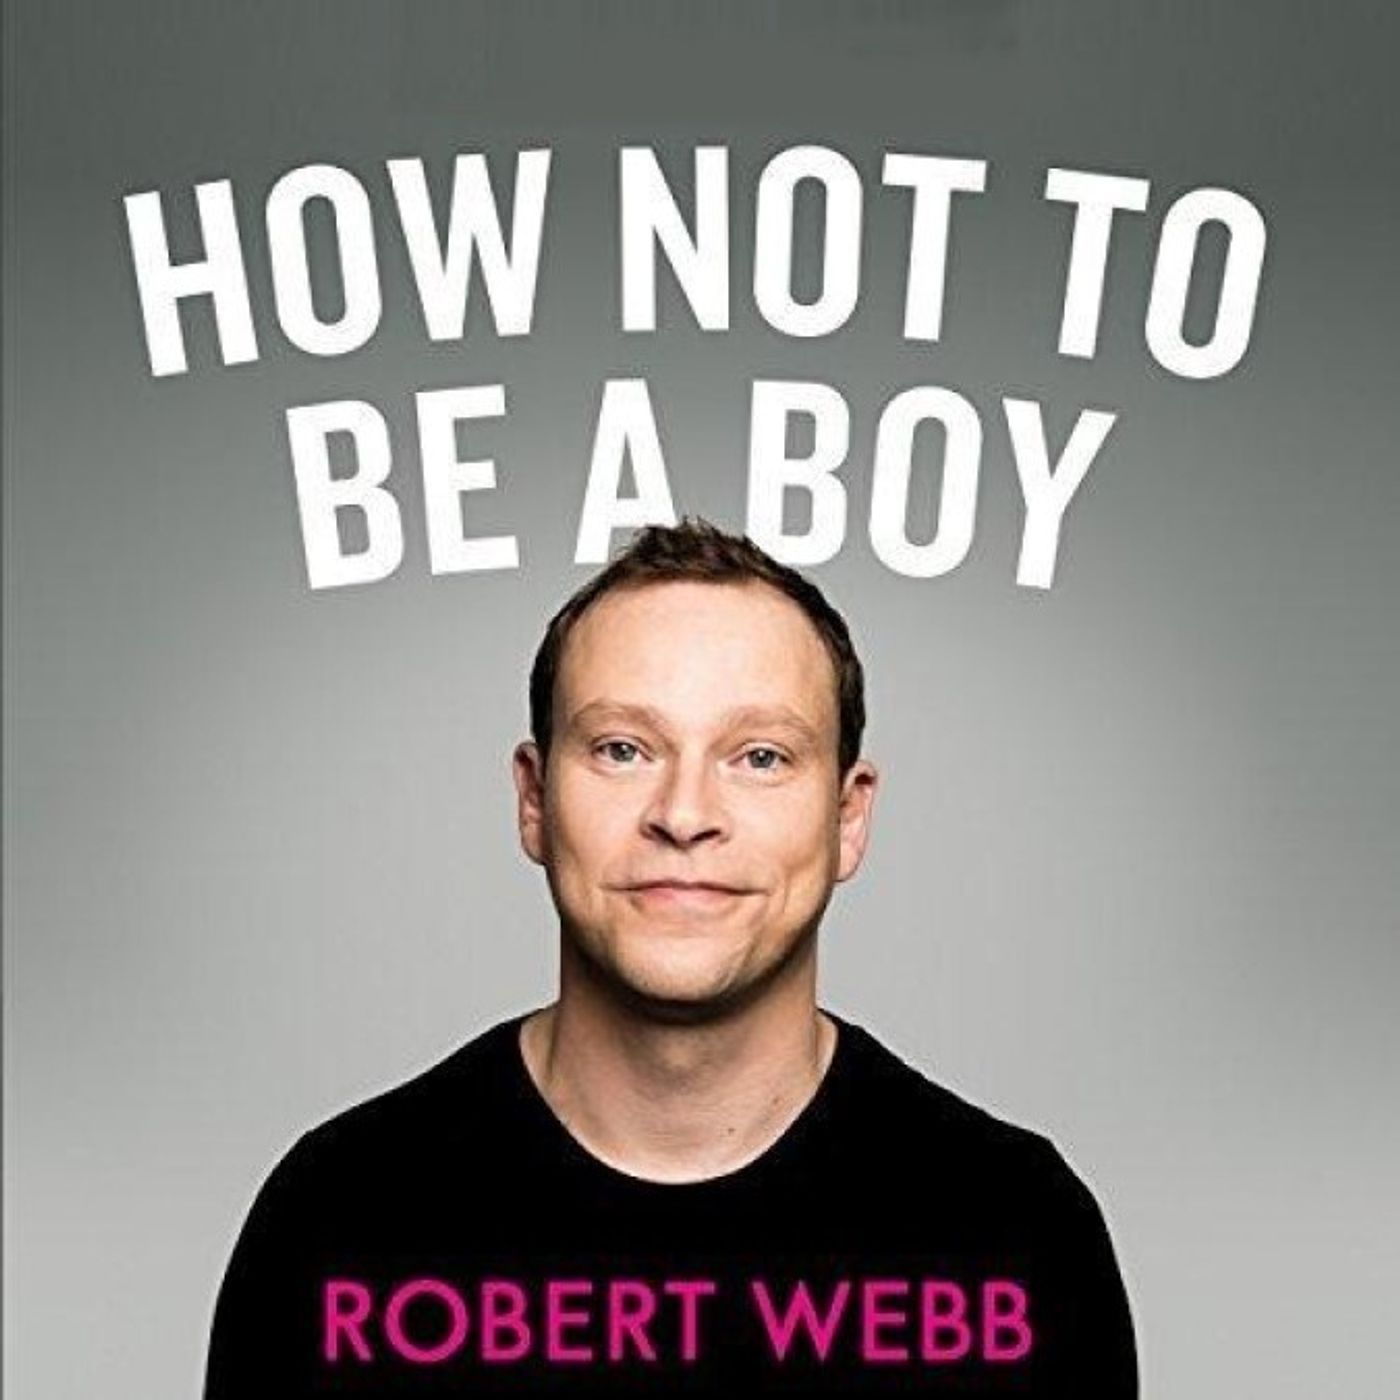 From The Archives: Robert Webb